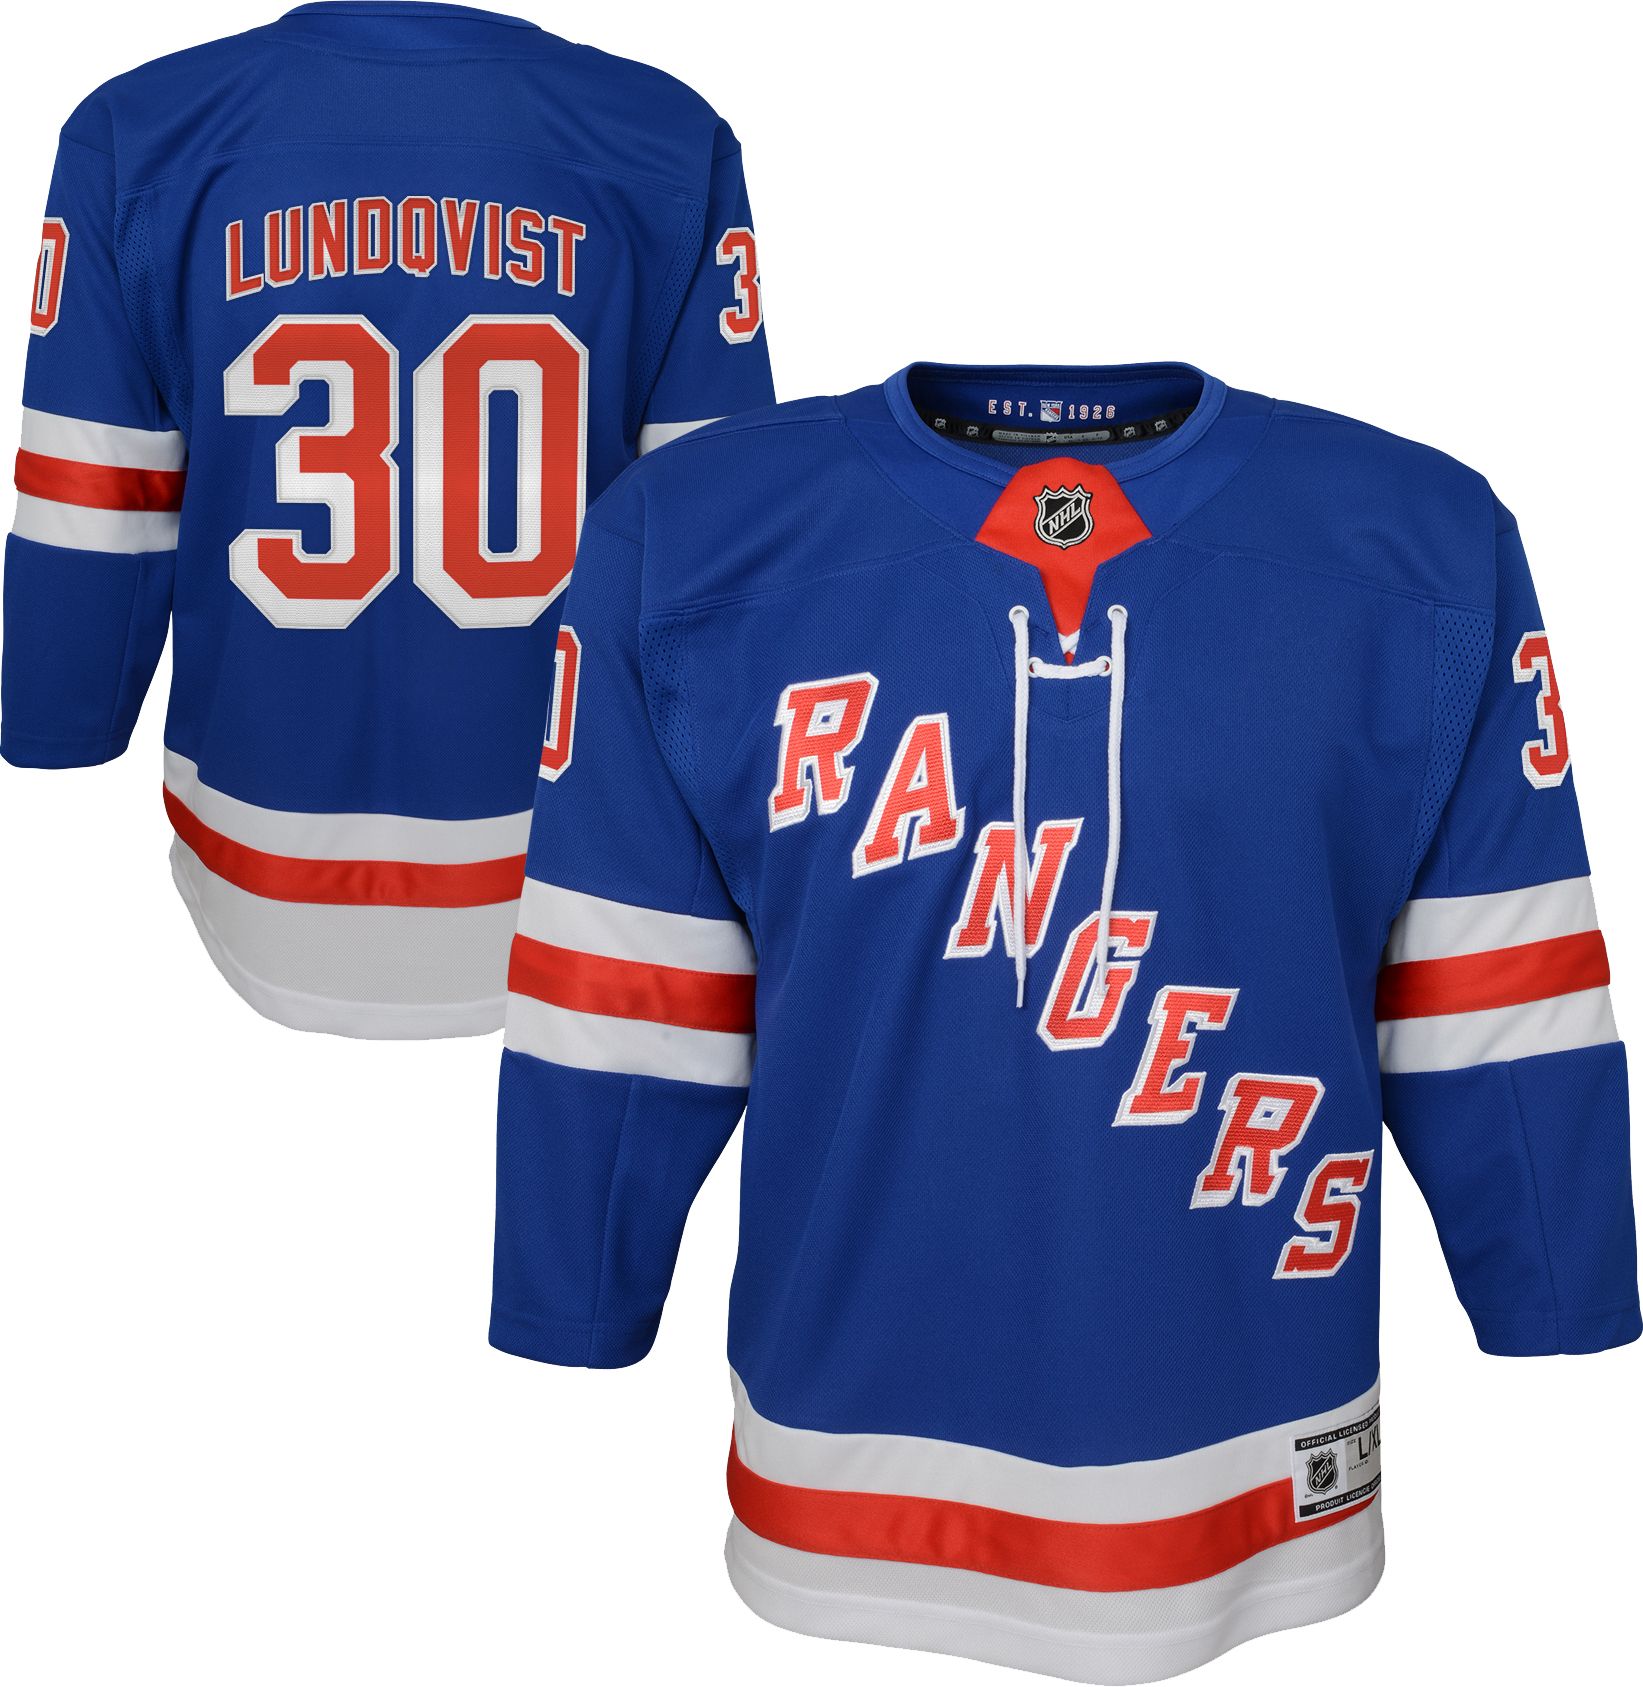 new york rangers youth jersey